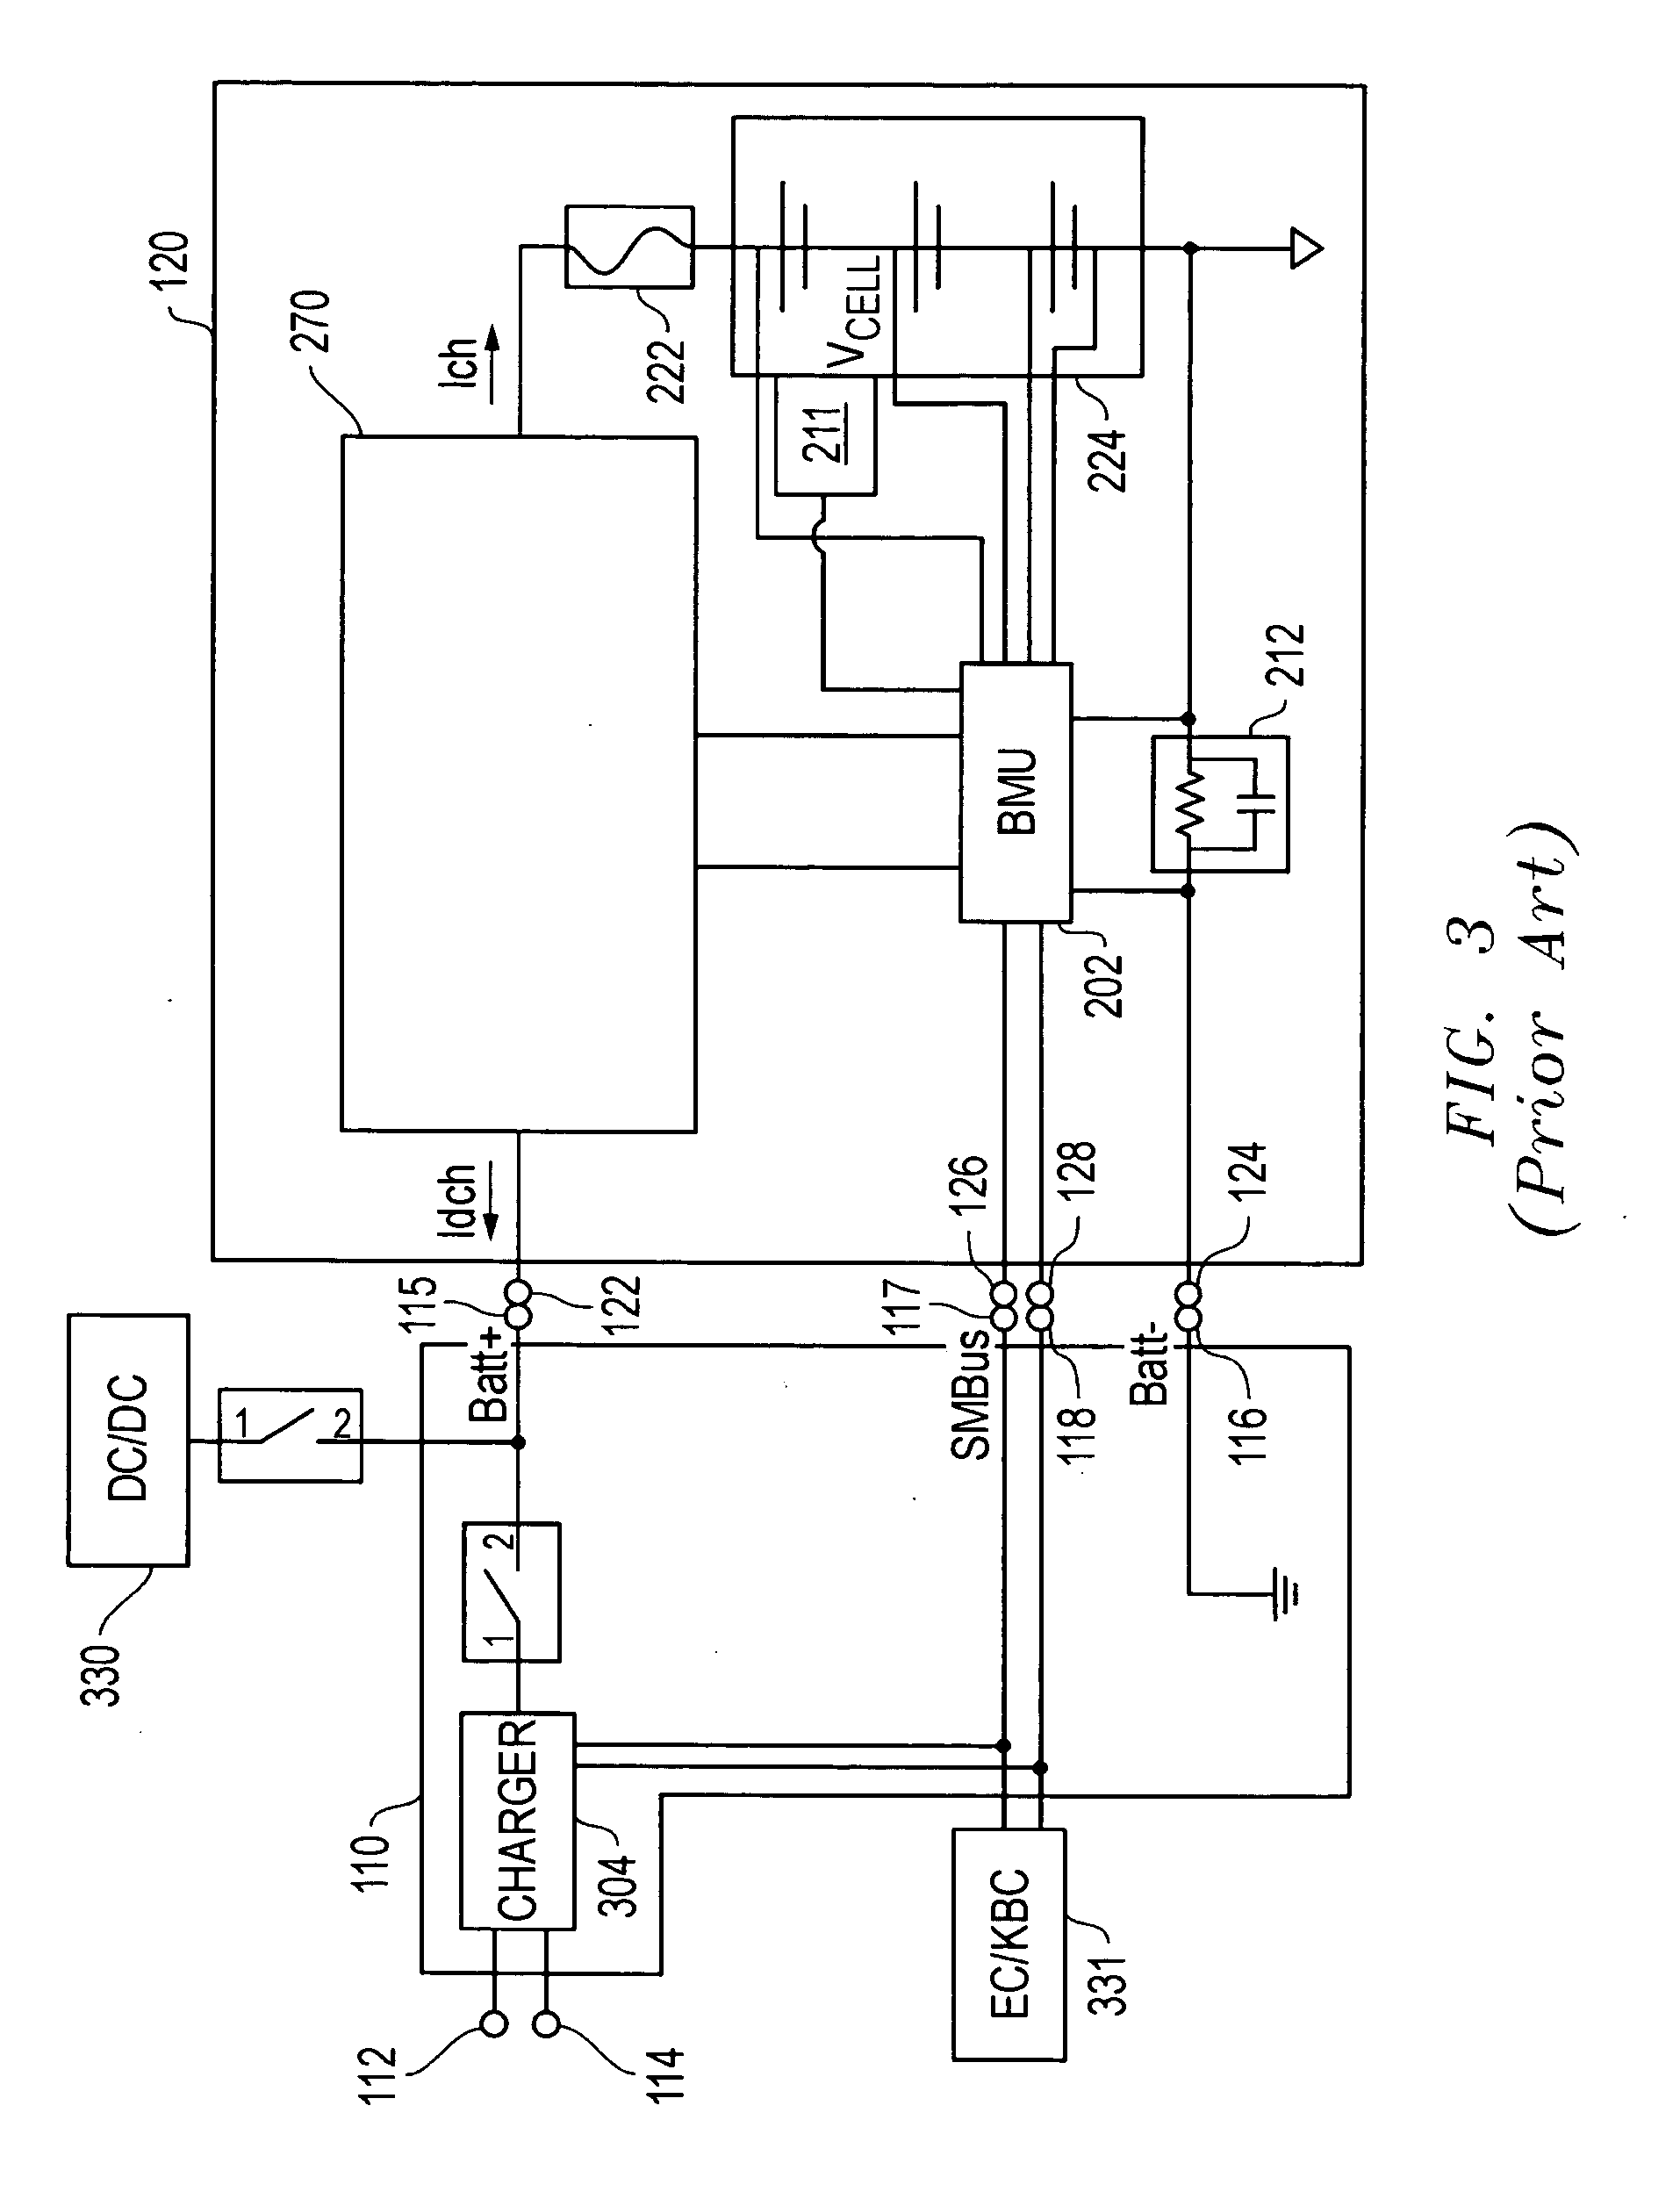 Systems and methods for temperature-dependent battery charging